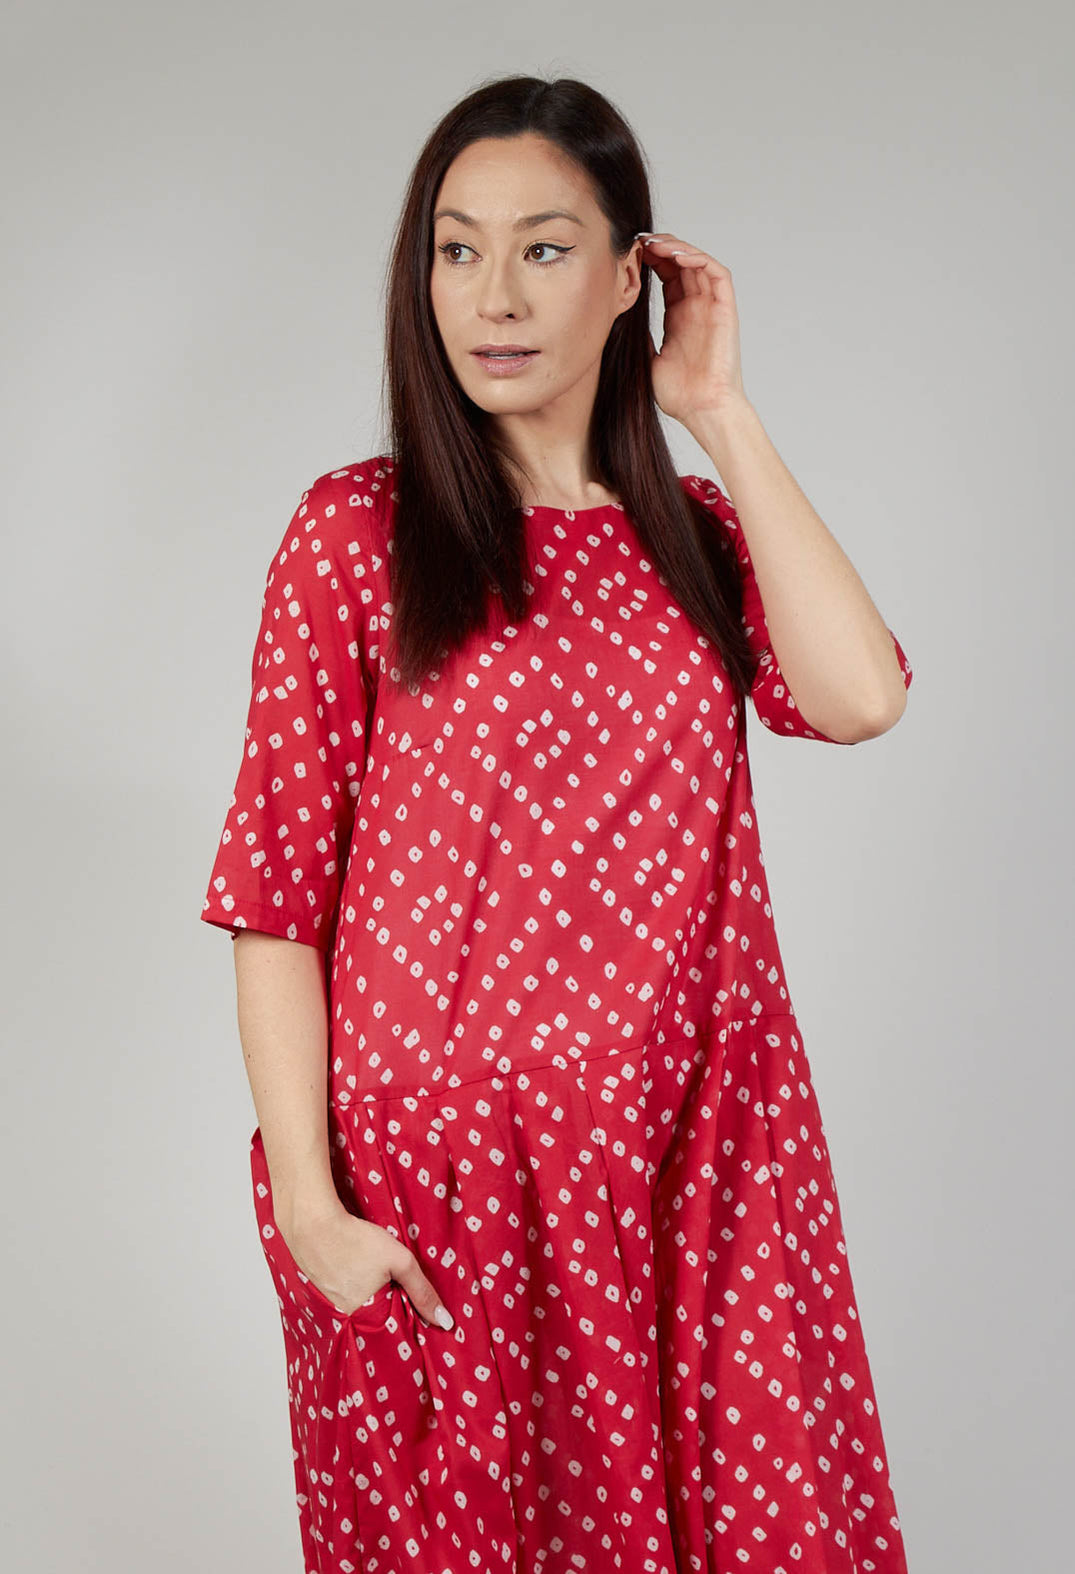 Rombo Patterned Dress in Rosso